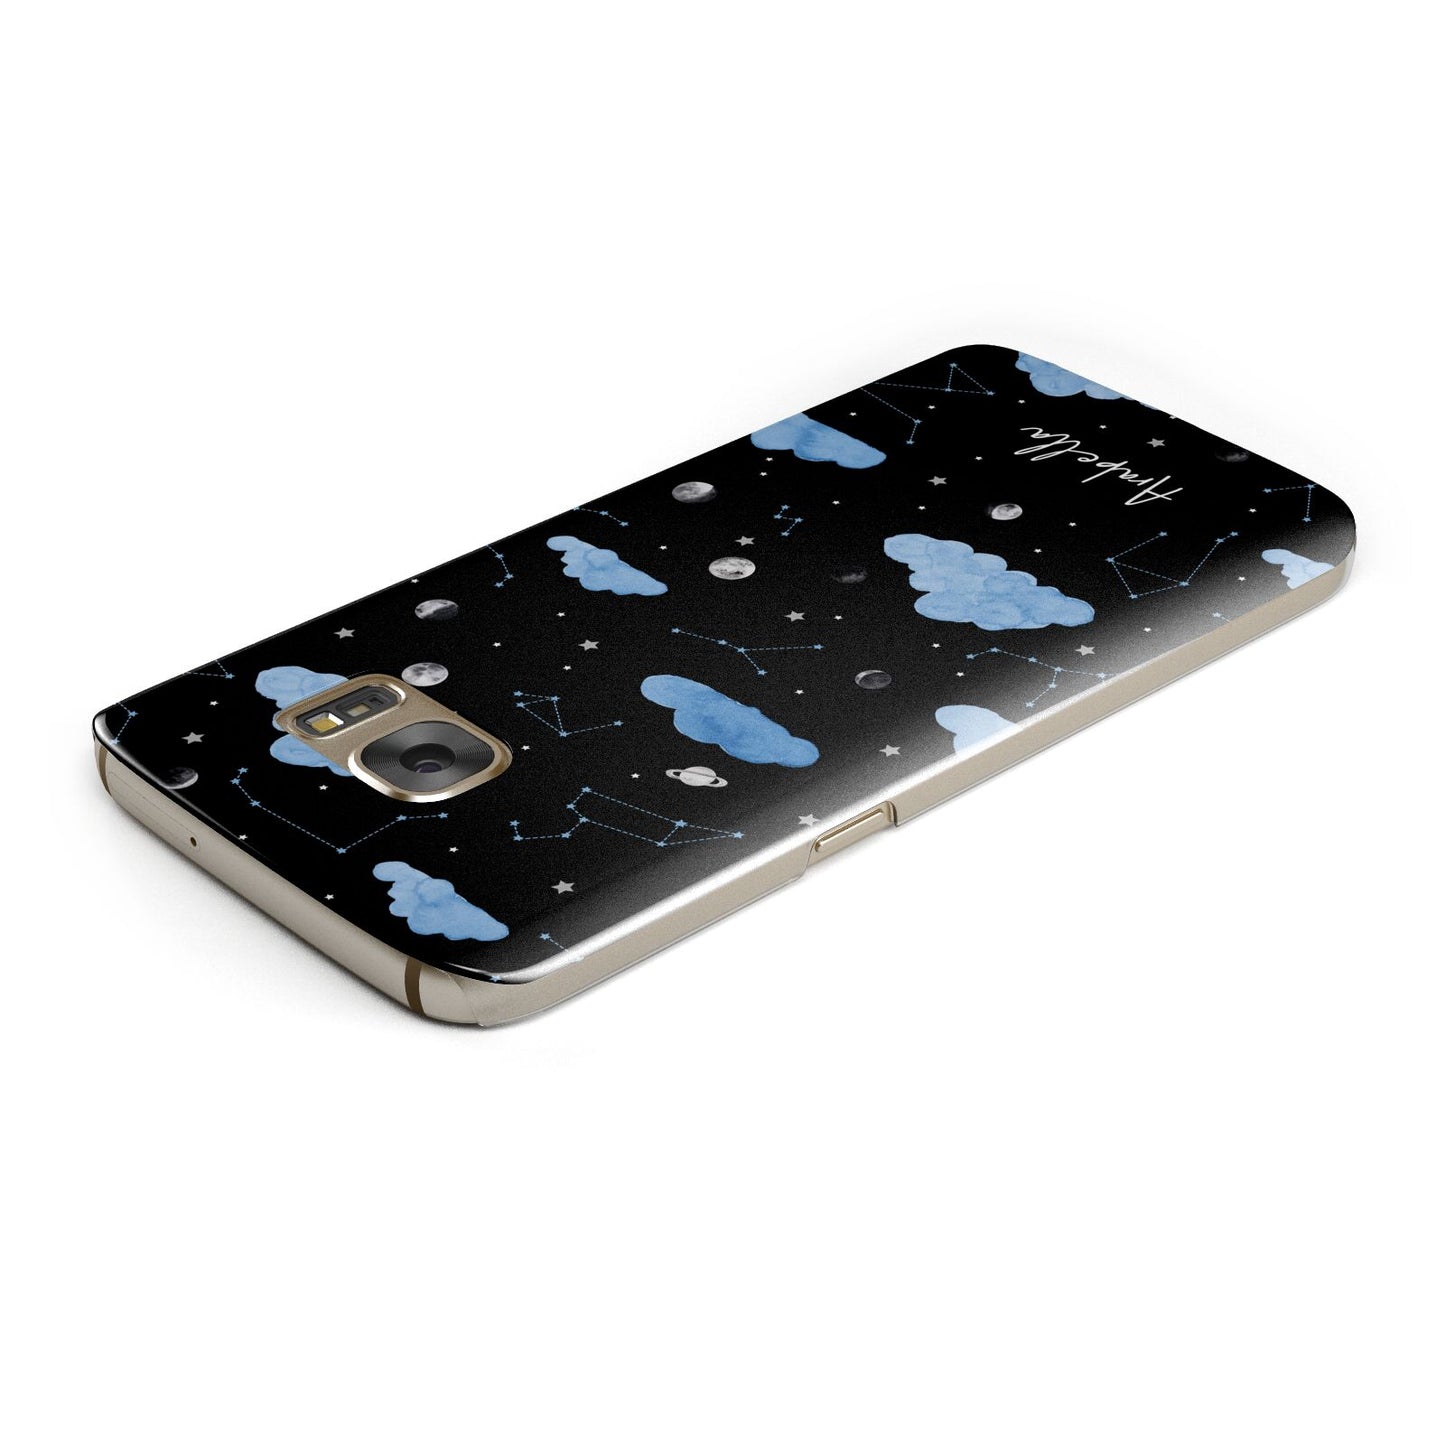 Cloudy Night Sky with Name Samsung Galaxy Case Top Cutout